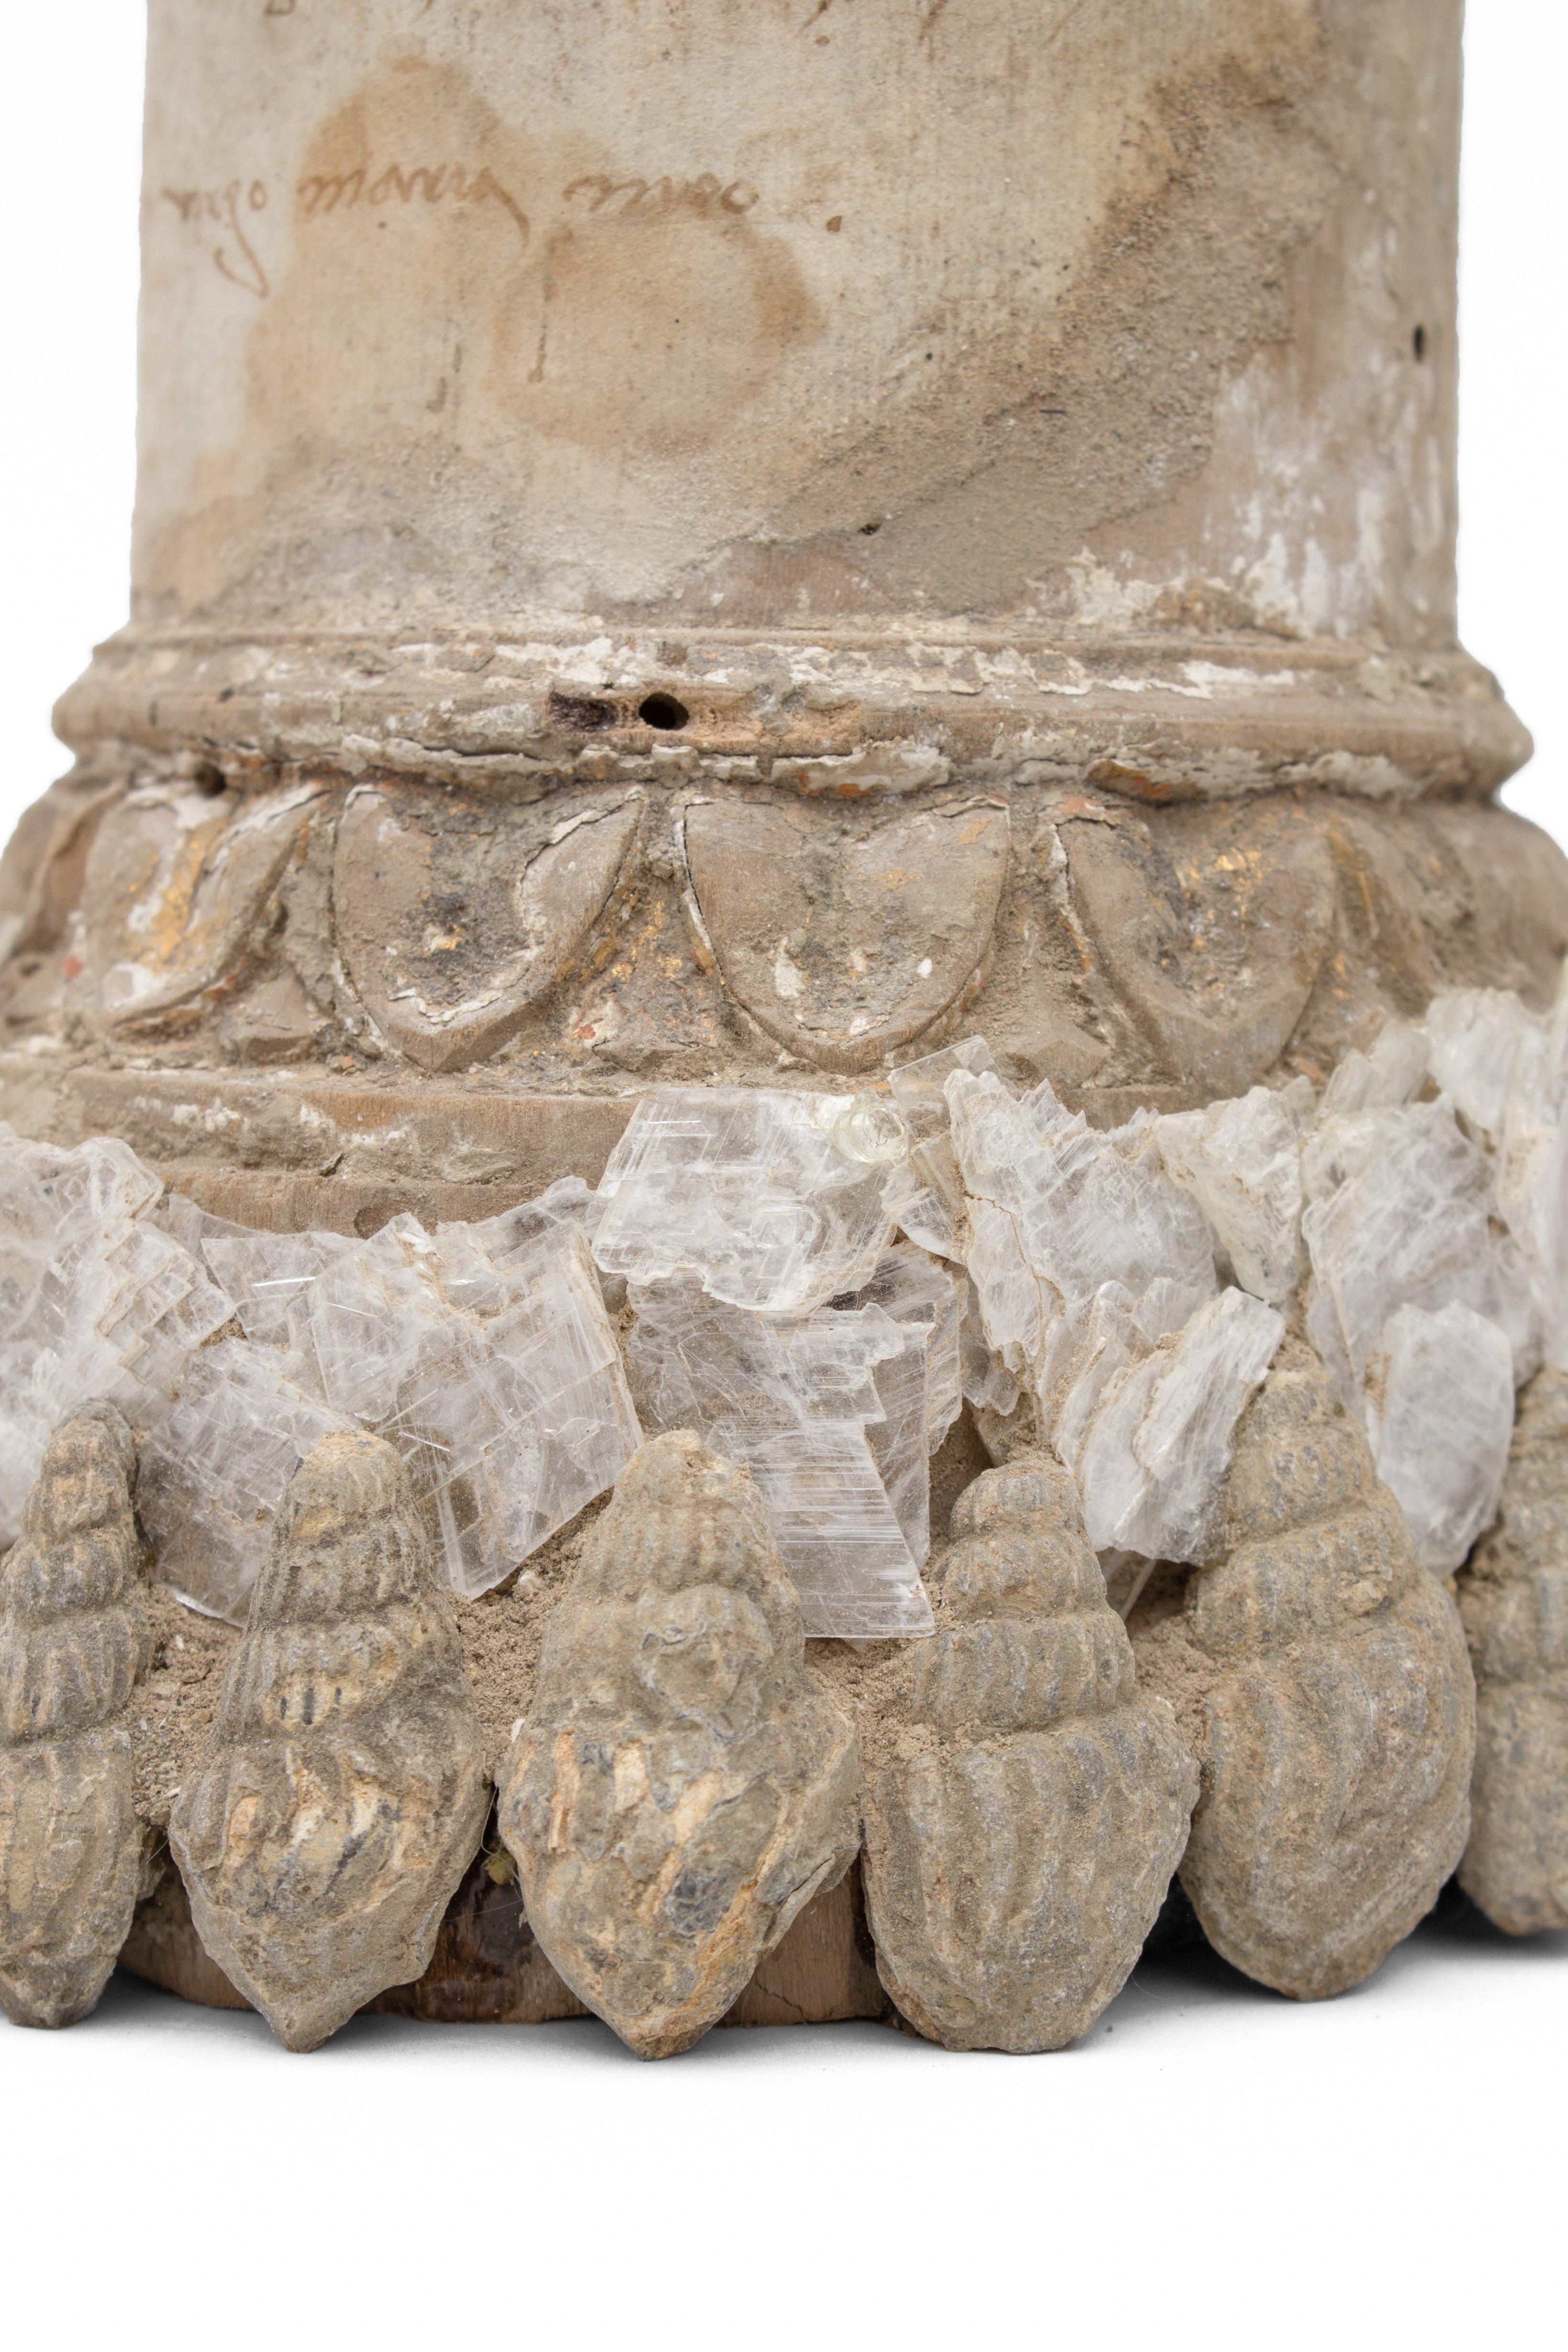 18th century Italian candlestick base decorated with selenite blades and fossil shells intertwined with selenite decoration. This candlestick is from a church in Florence. It was found and saved from the notorious flooding of the Arno River in